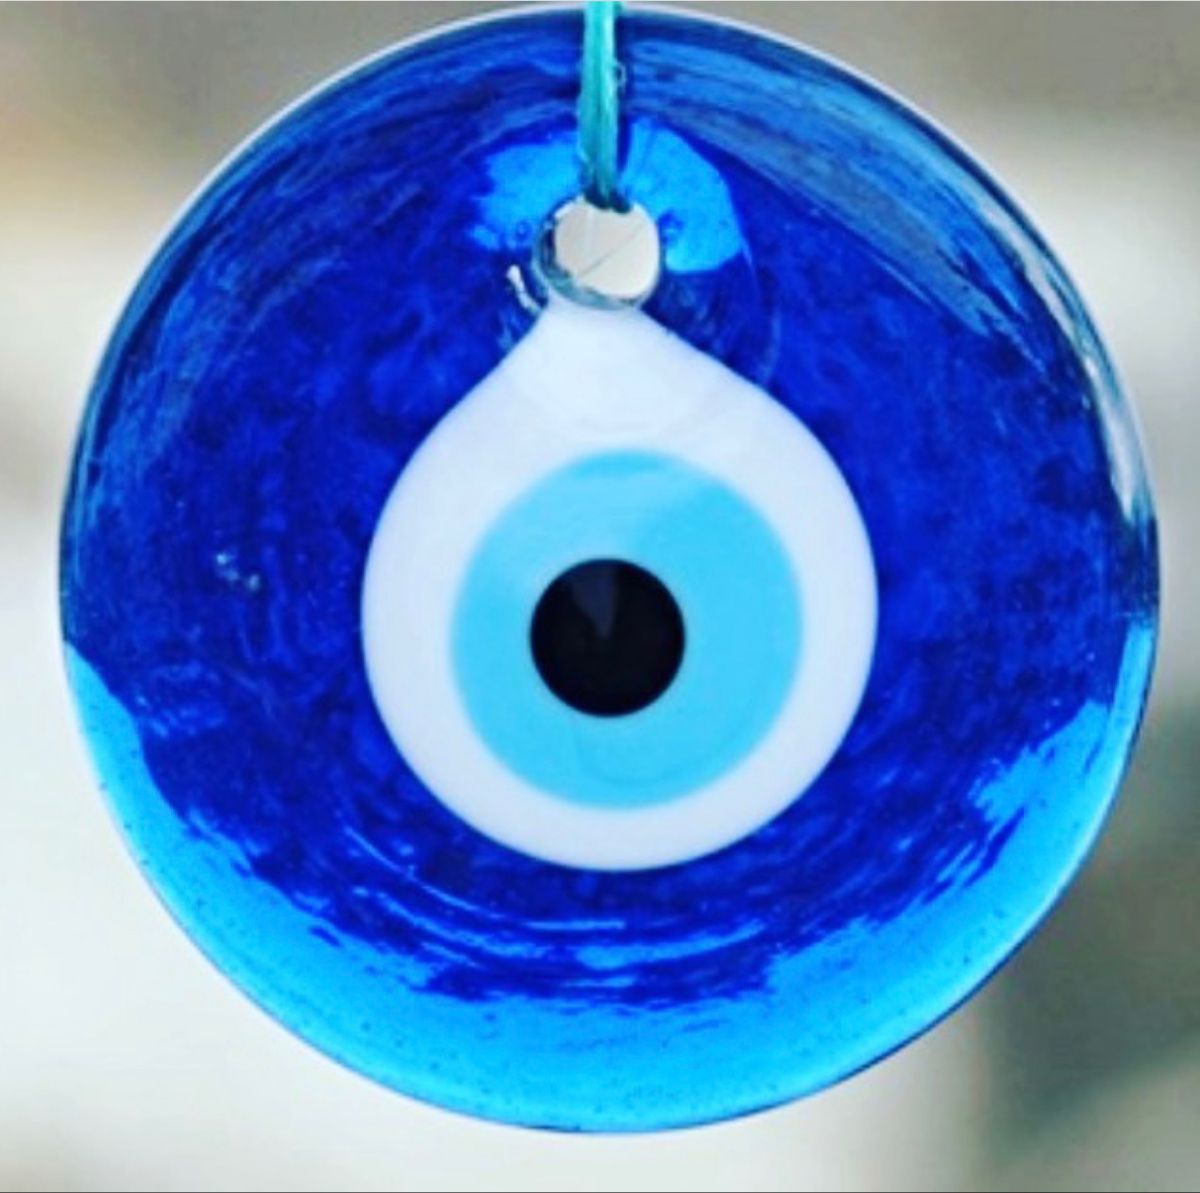 The Powerful Meaning Behind The Evil Eye